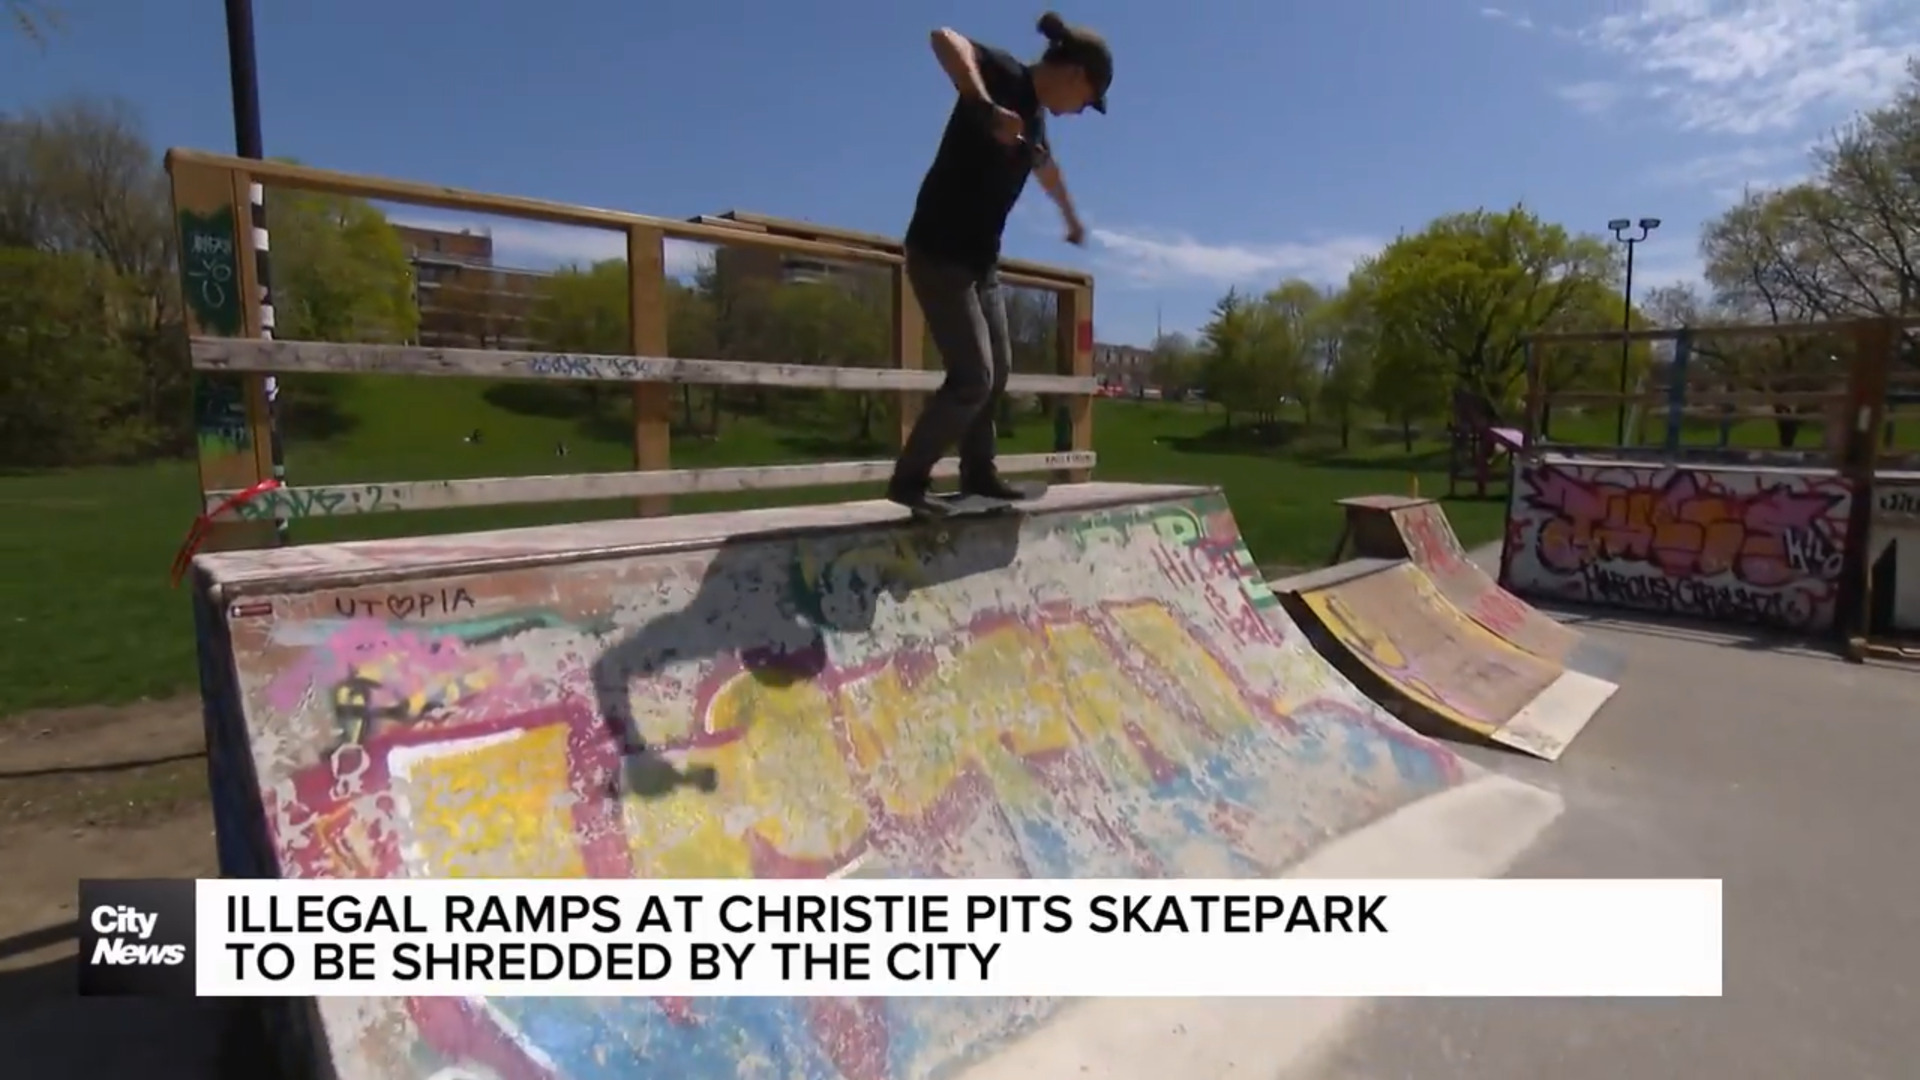 Illegal skatepark ramps at Christie Pits to be shredded by the city